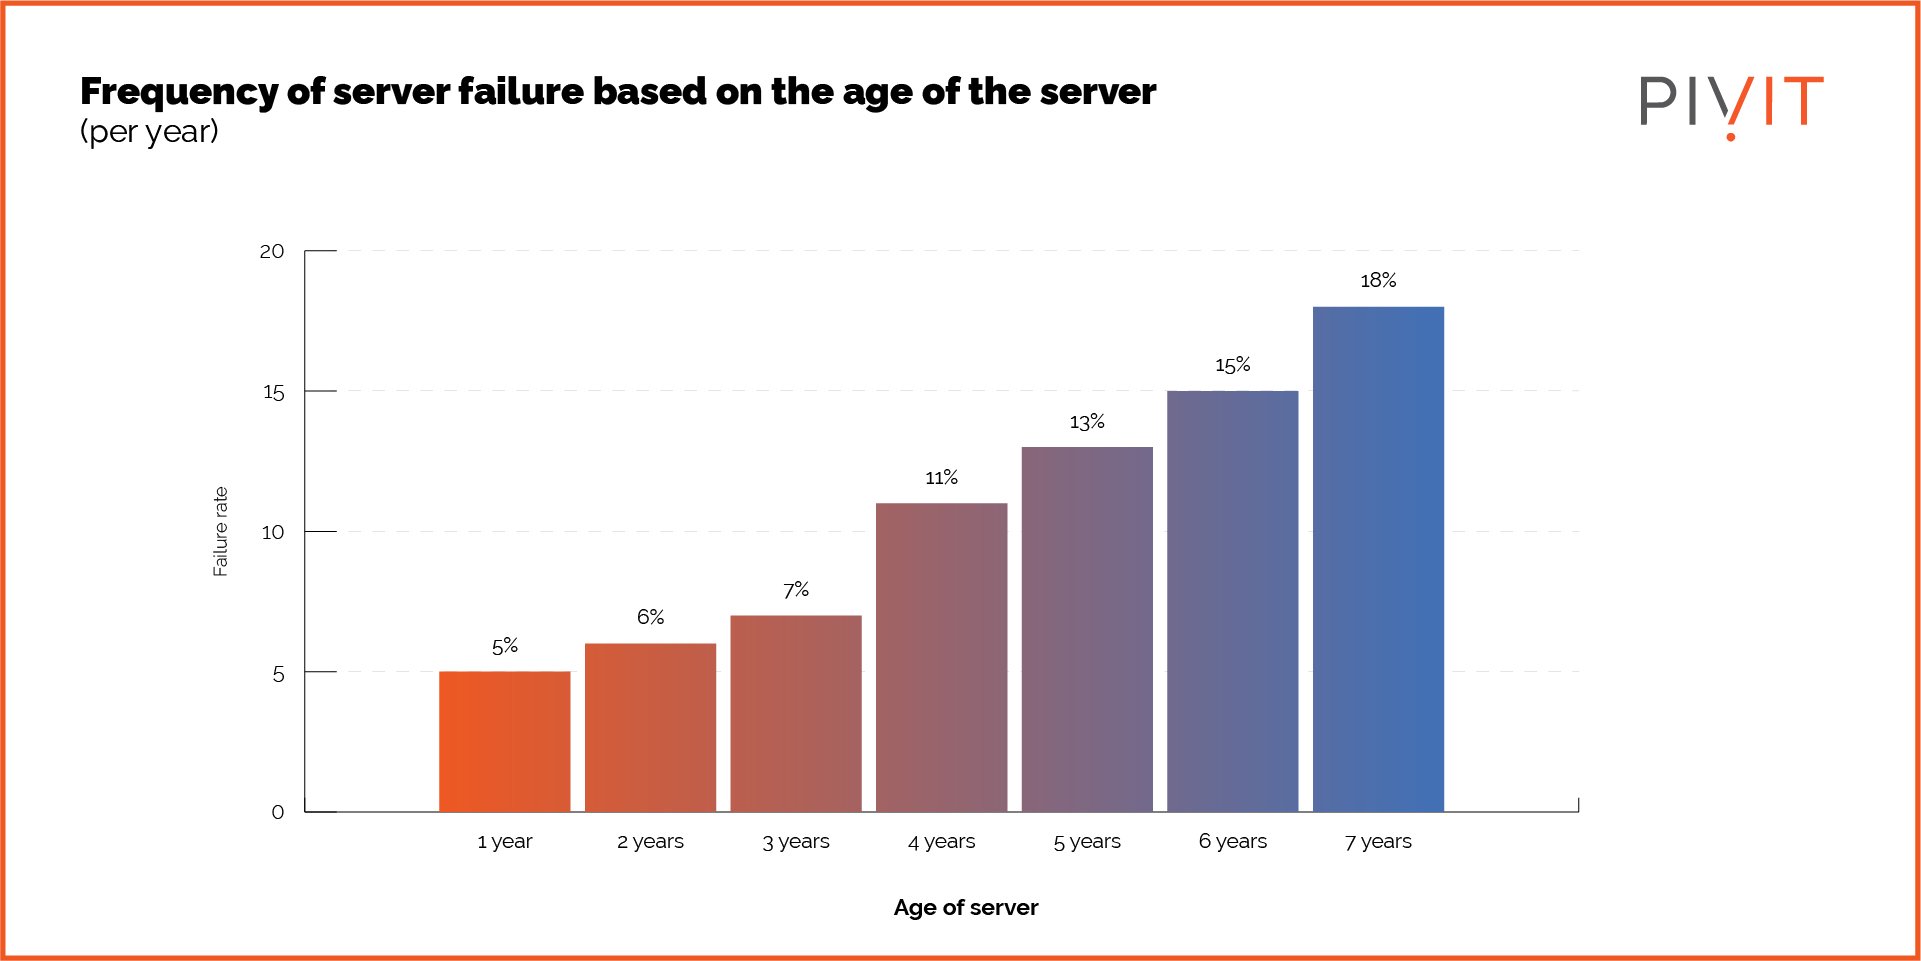 Frequency of server failure based on the age of the server